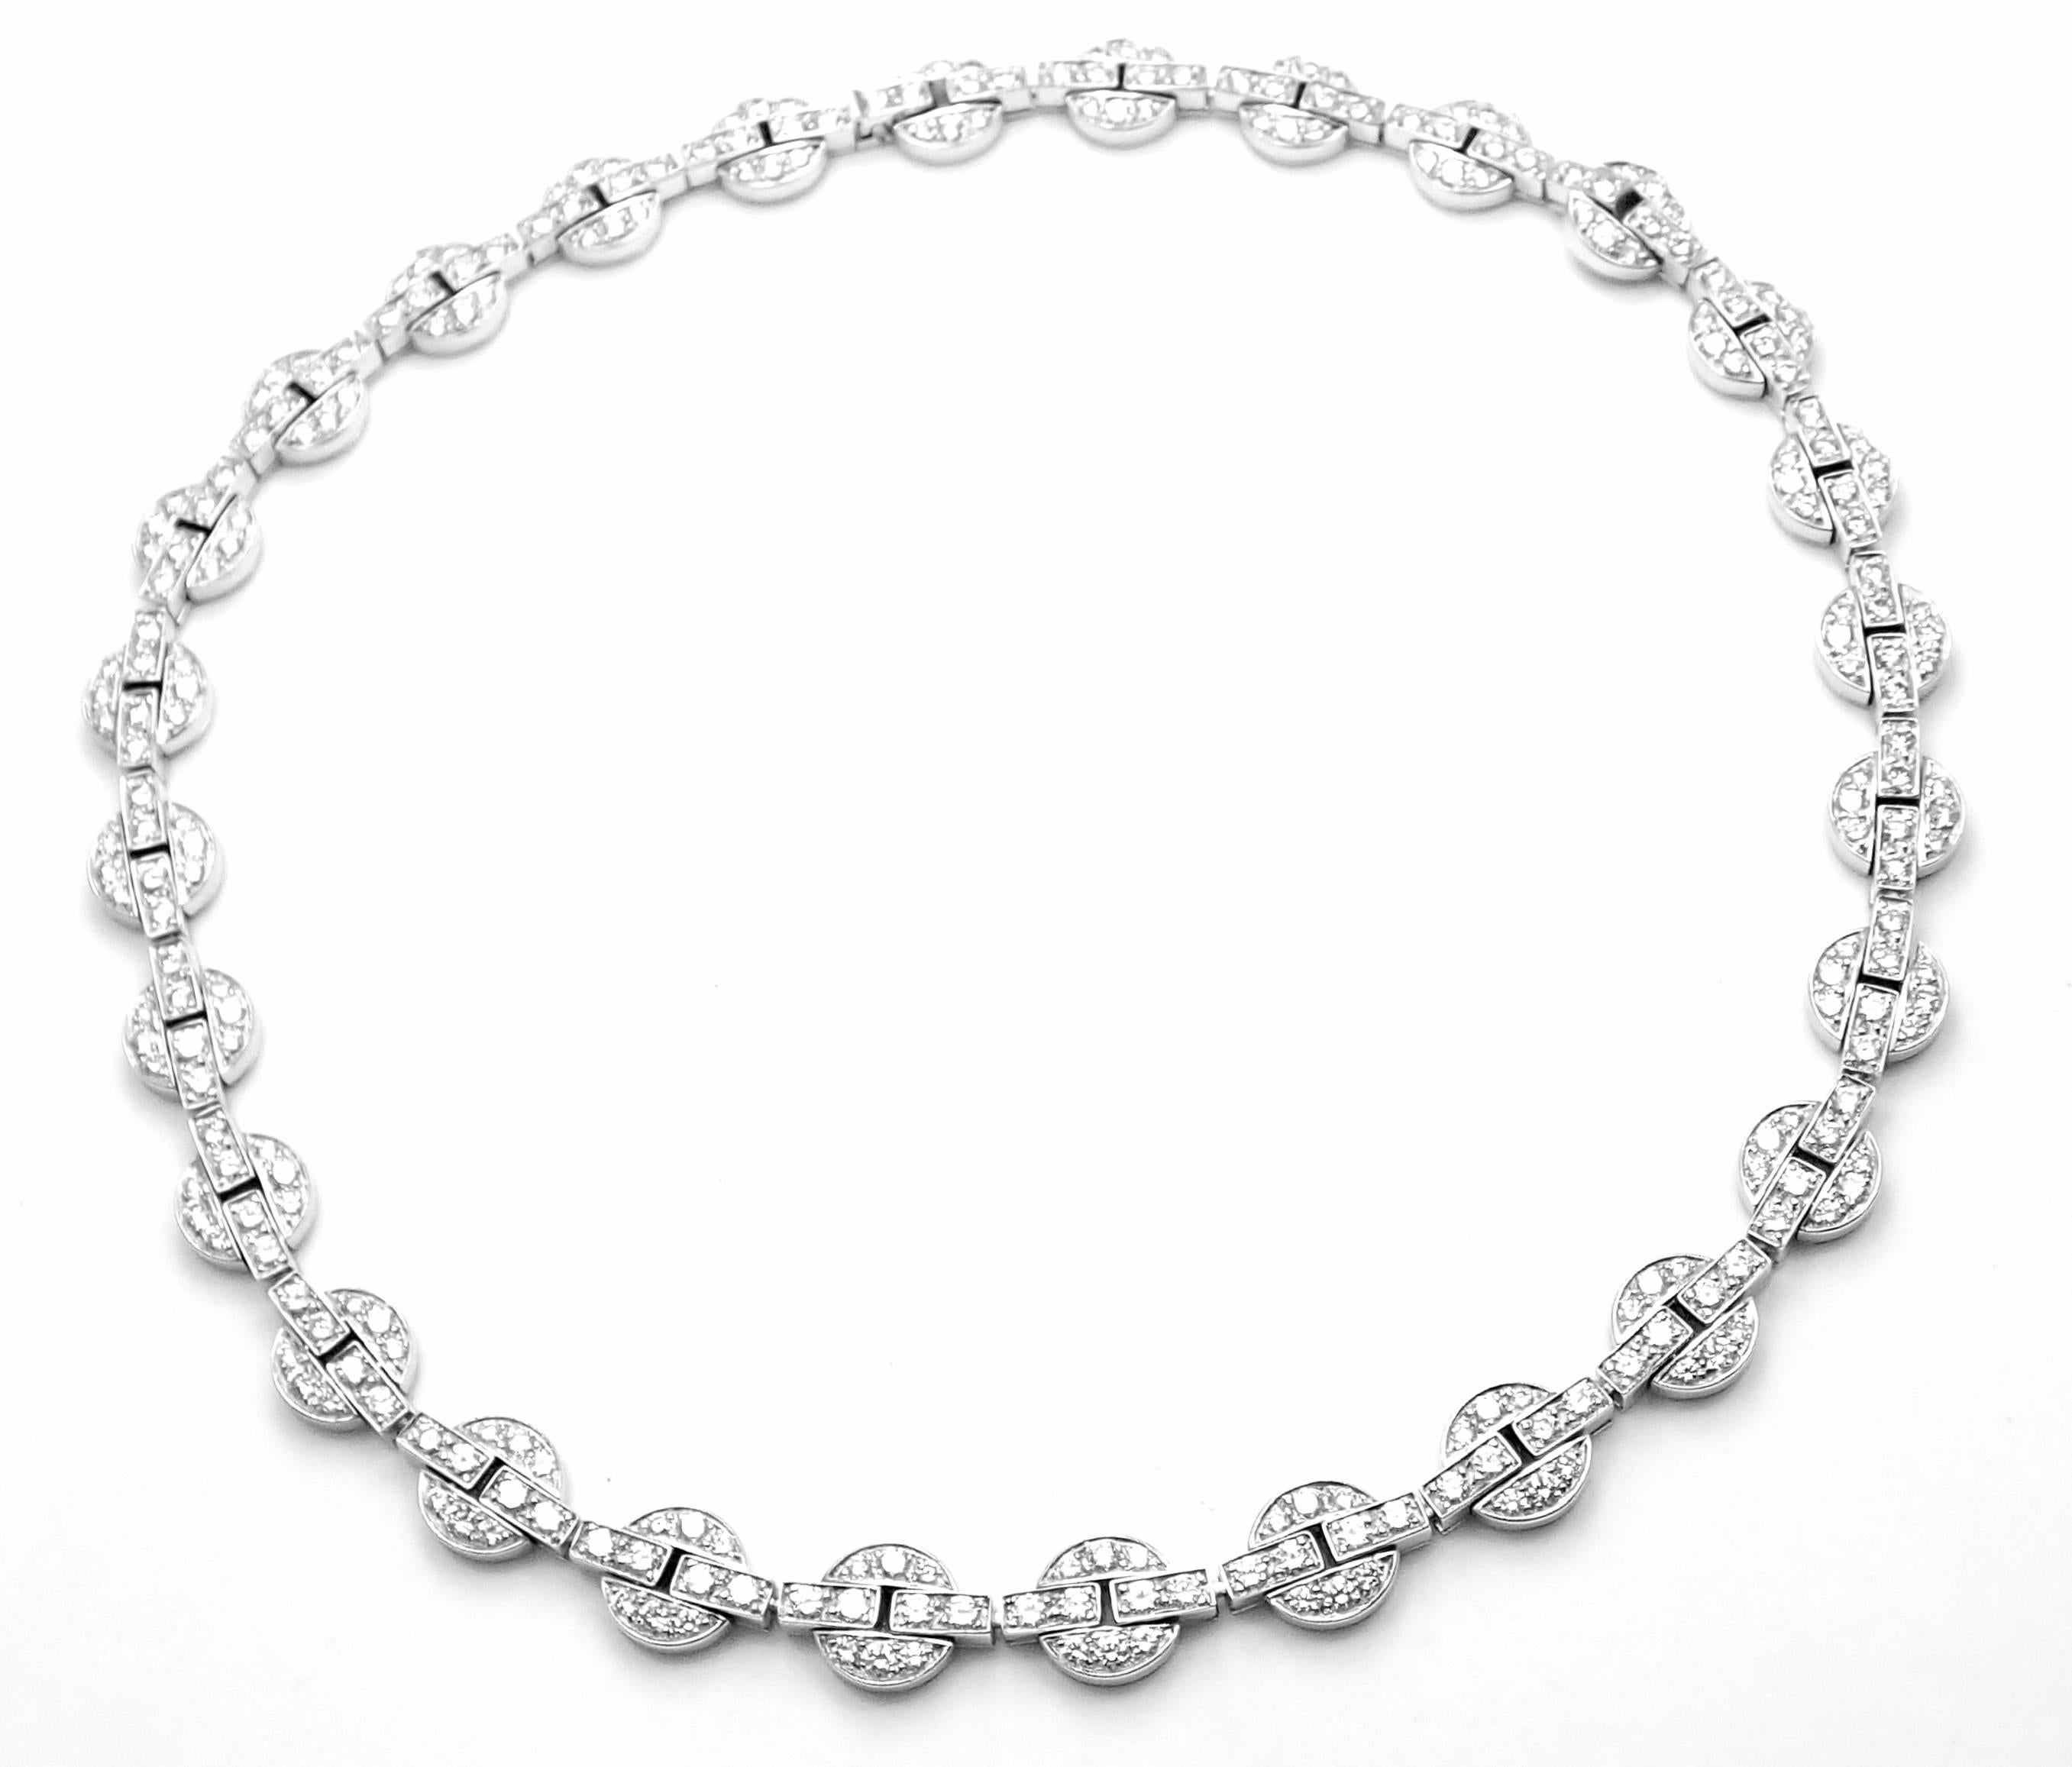 18k White Gold Diamond Orissa Necklace by Cartier. 
This necklace comes with Cartier certificate and a Cartier box.
With 280 Round brilliant cut diamonds VVS1 clarity E color Total Diamond Weight approx. 9.17ct
Details: 
Length: 15.5